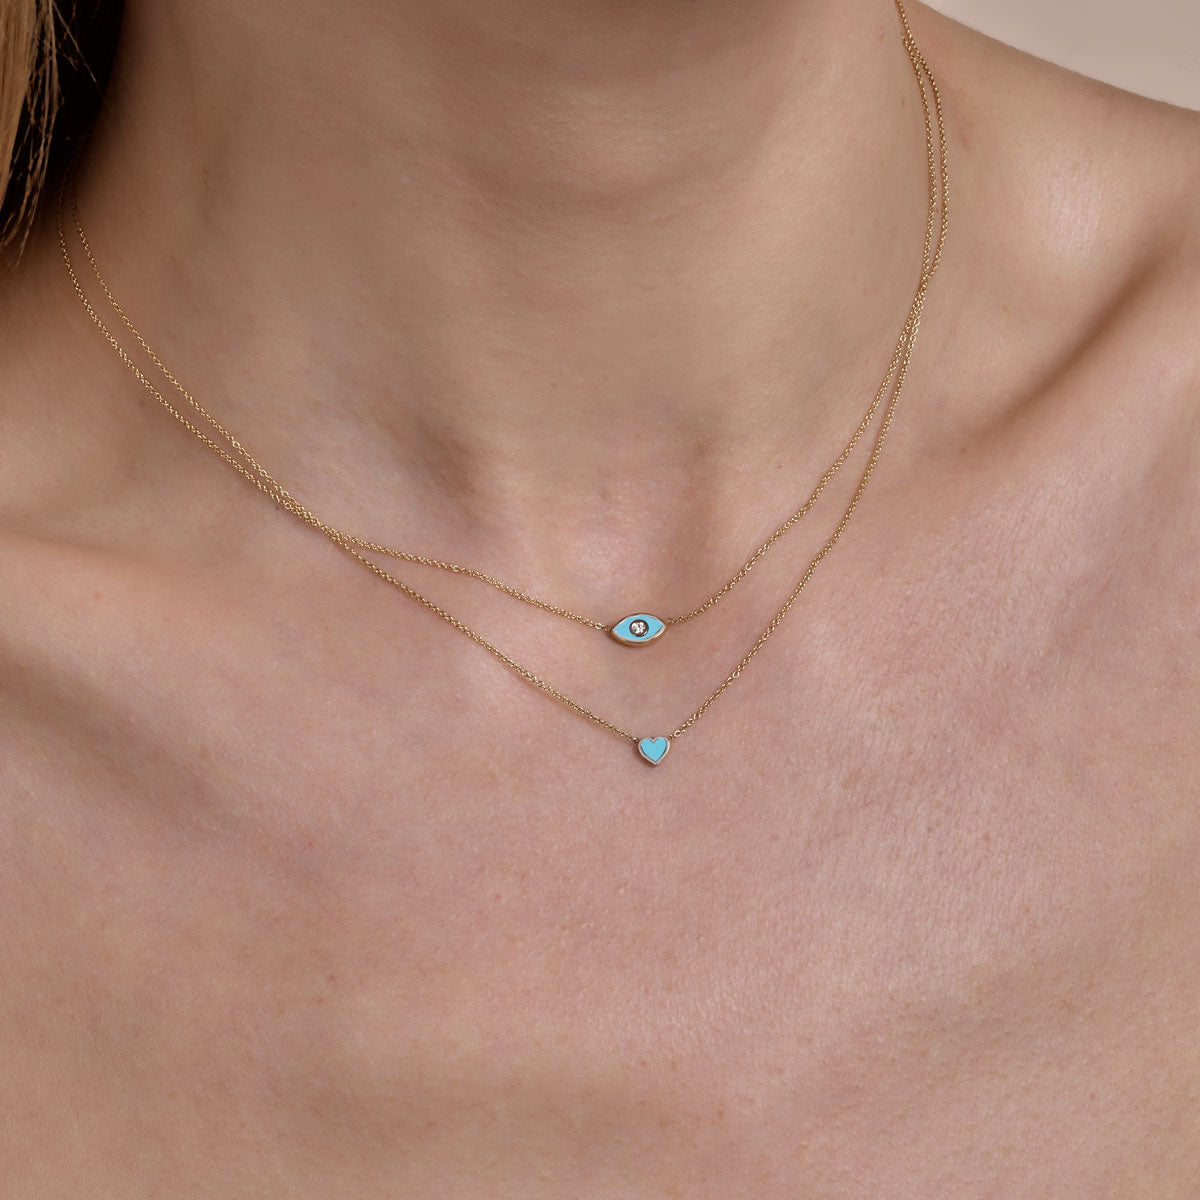 gold turquoise evil eye necklace and gold turquoise heart necklace on models neck